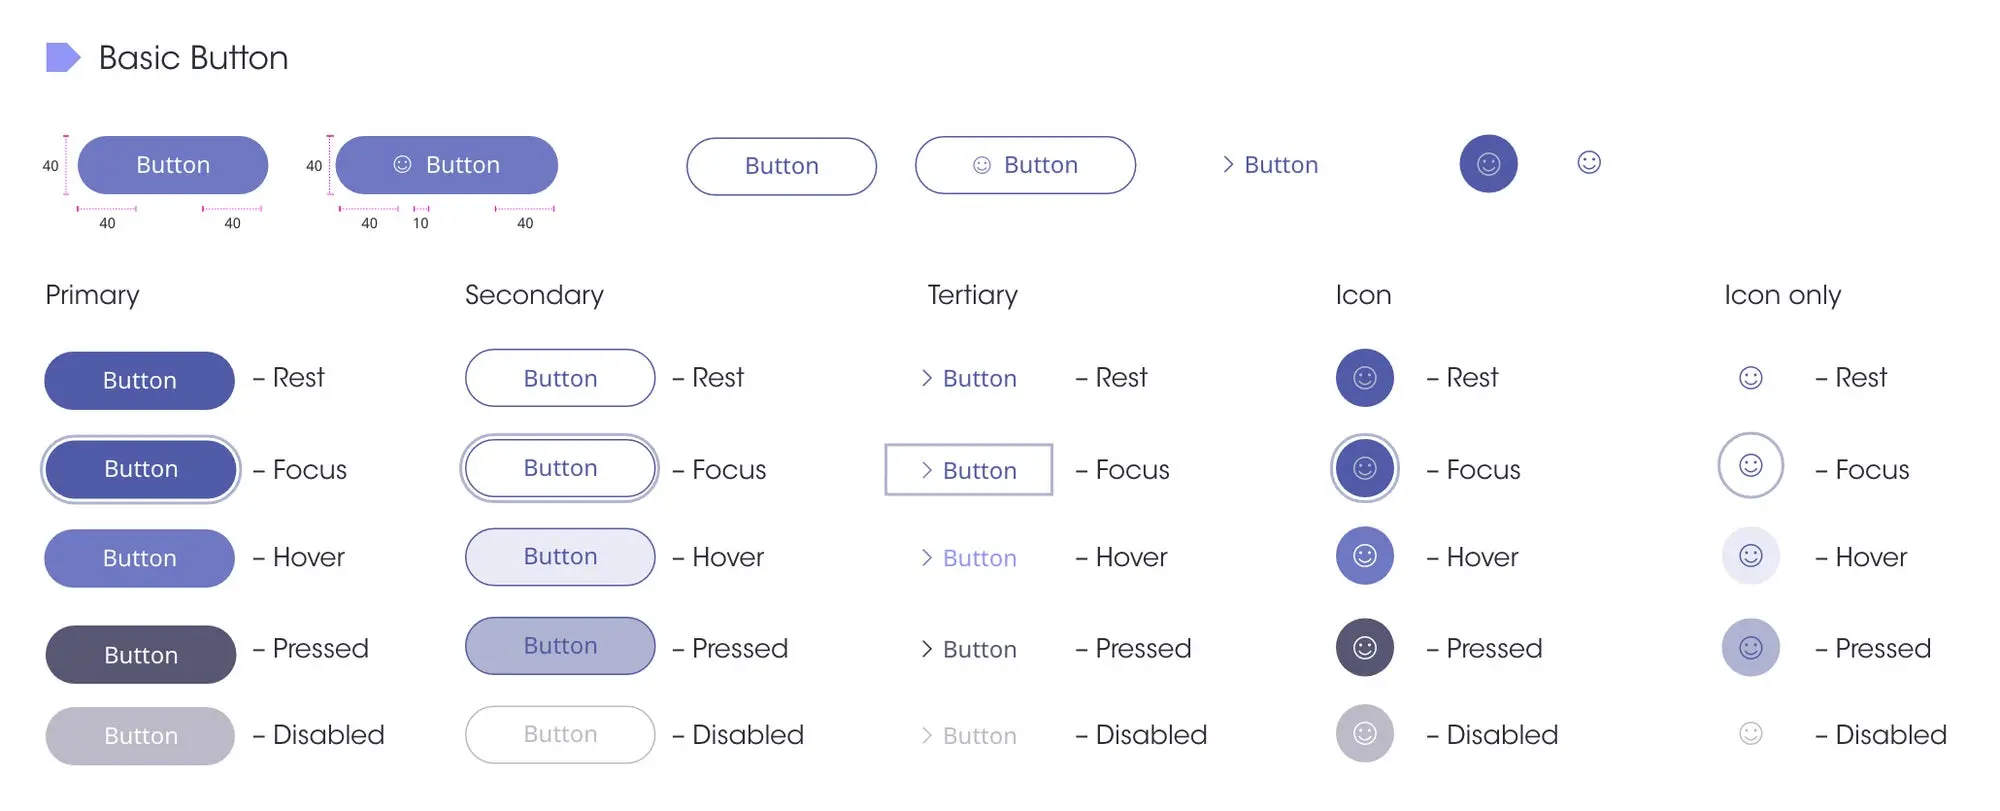 Basic button showing front end production on Syntax. 